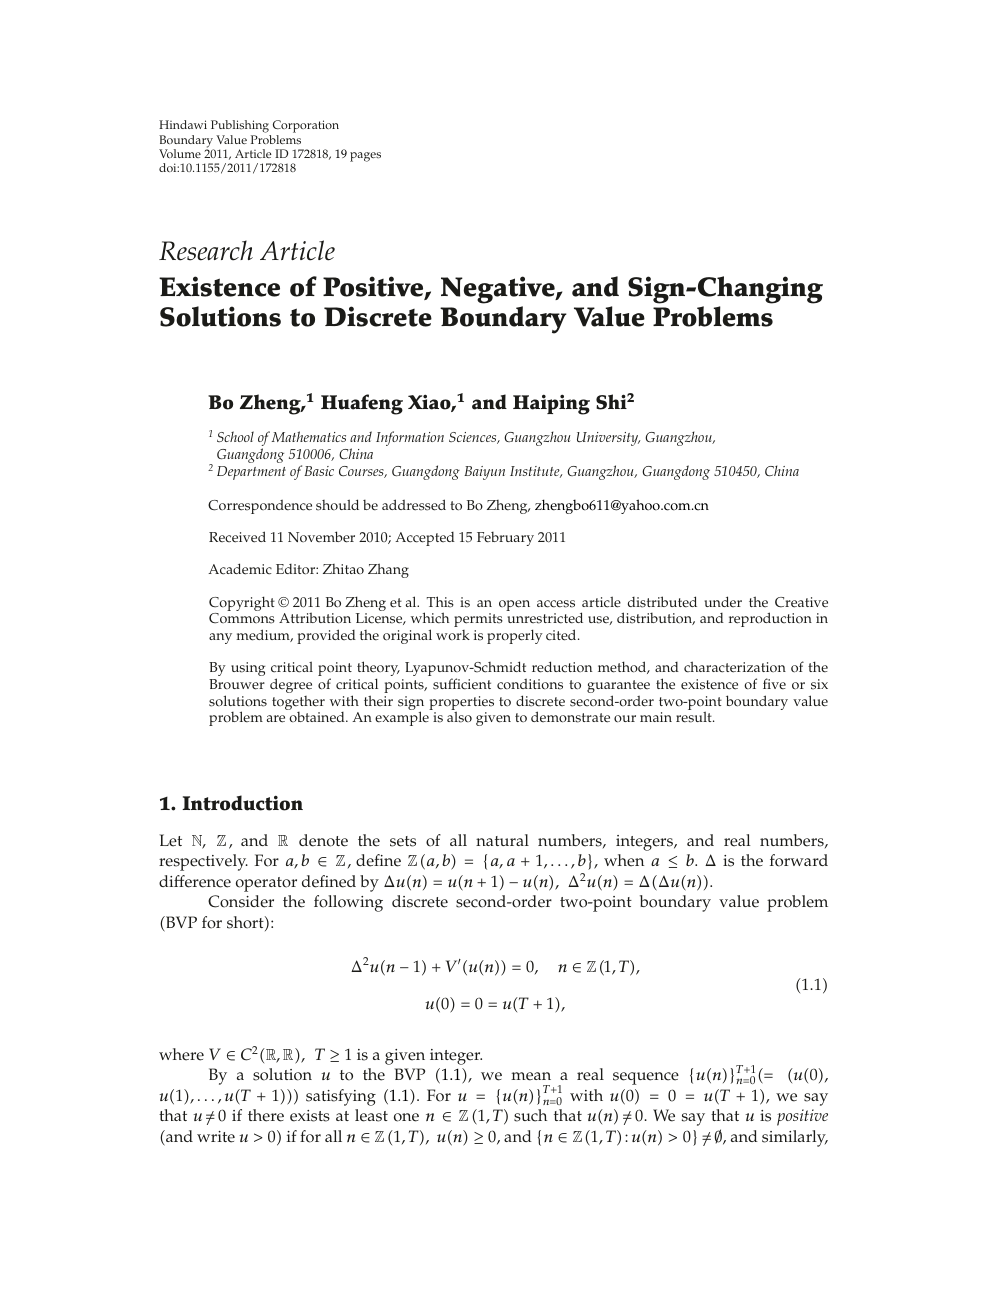 Existence Of Positive Negative And Sign Changing Solutions To Discrete Boundary Value Problems Topic Of Research Paper In Mathematics Download Scholarly Article Pdf And Read For Free On Cyberleninka Open Science Hub